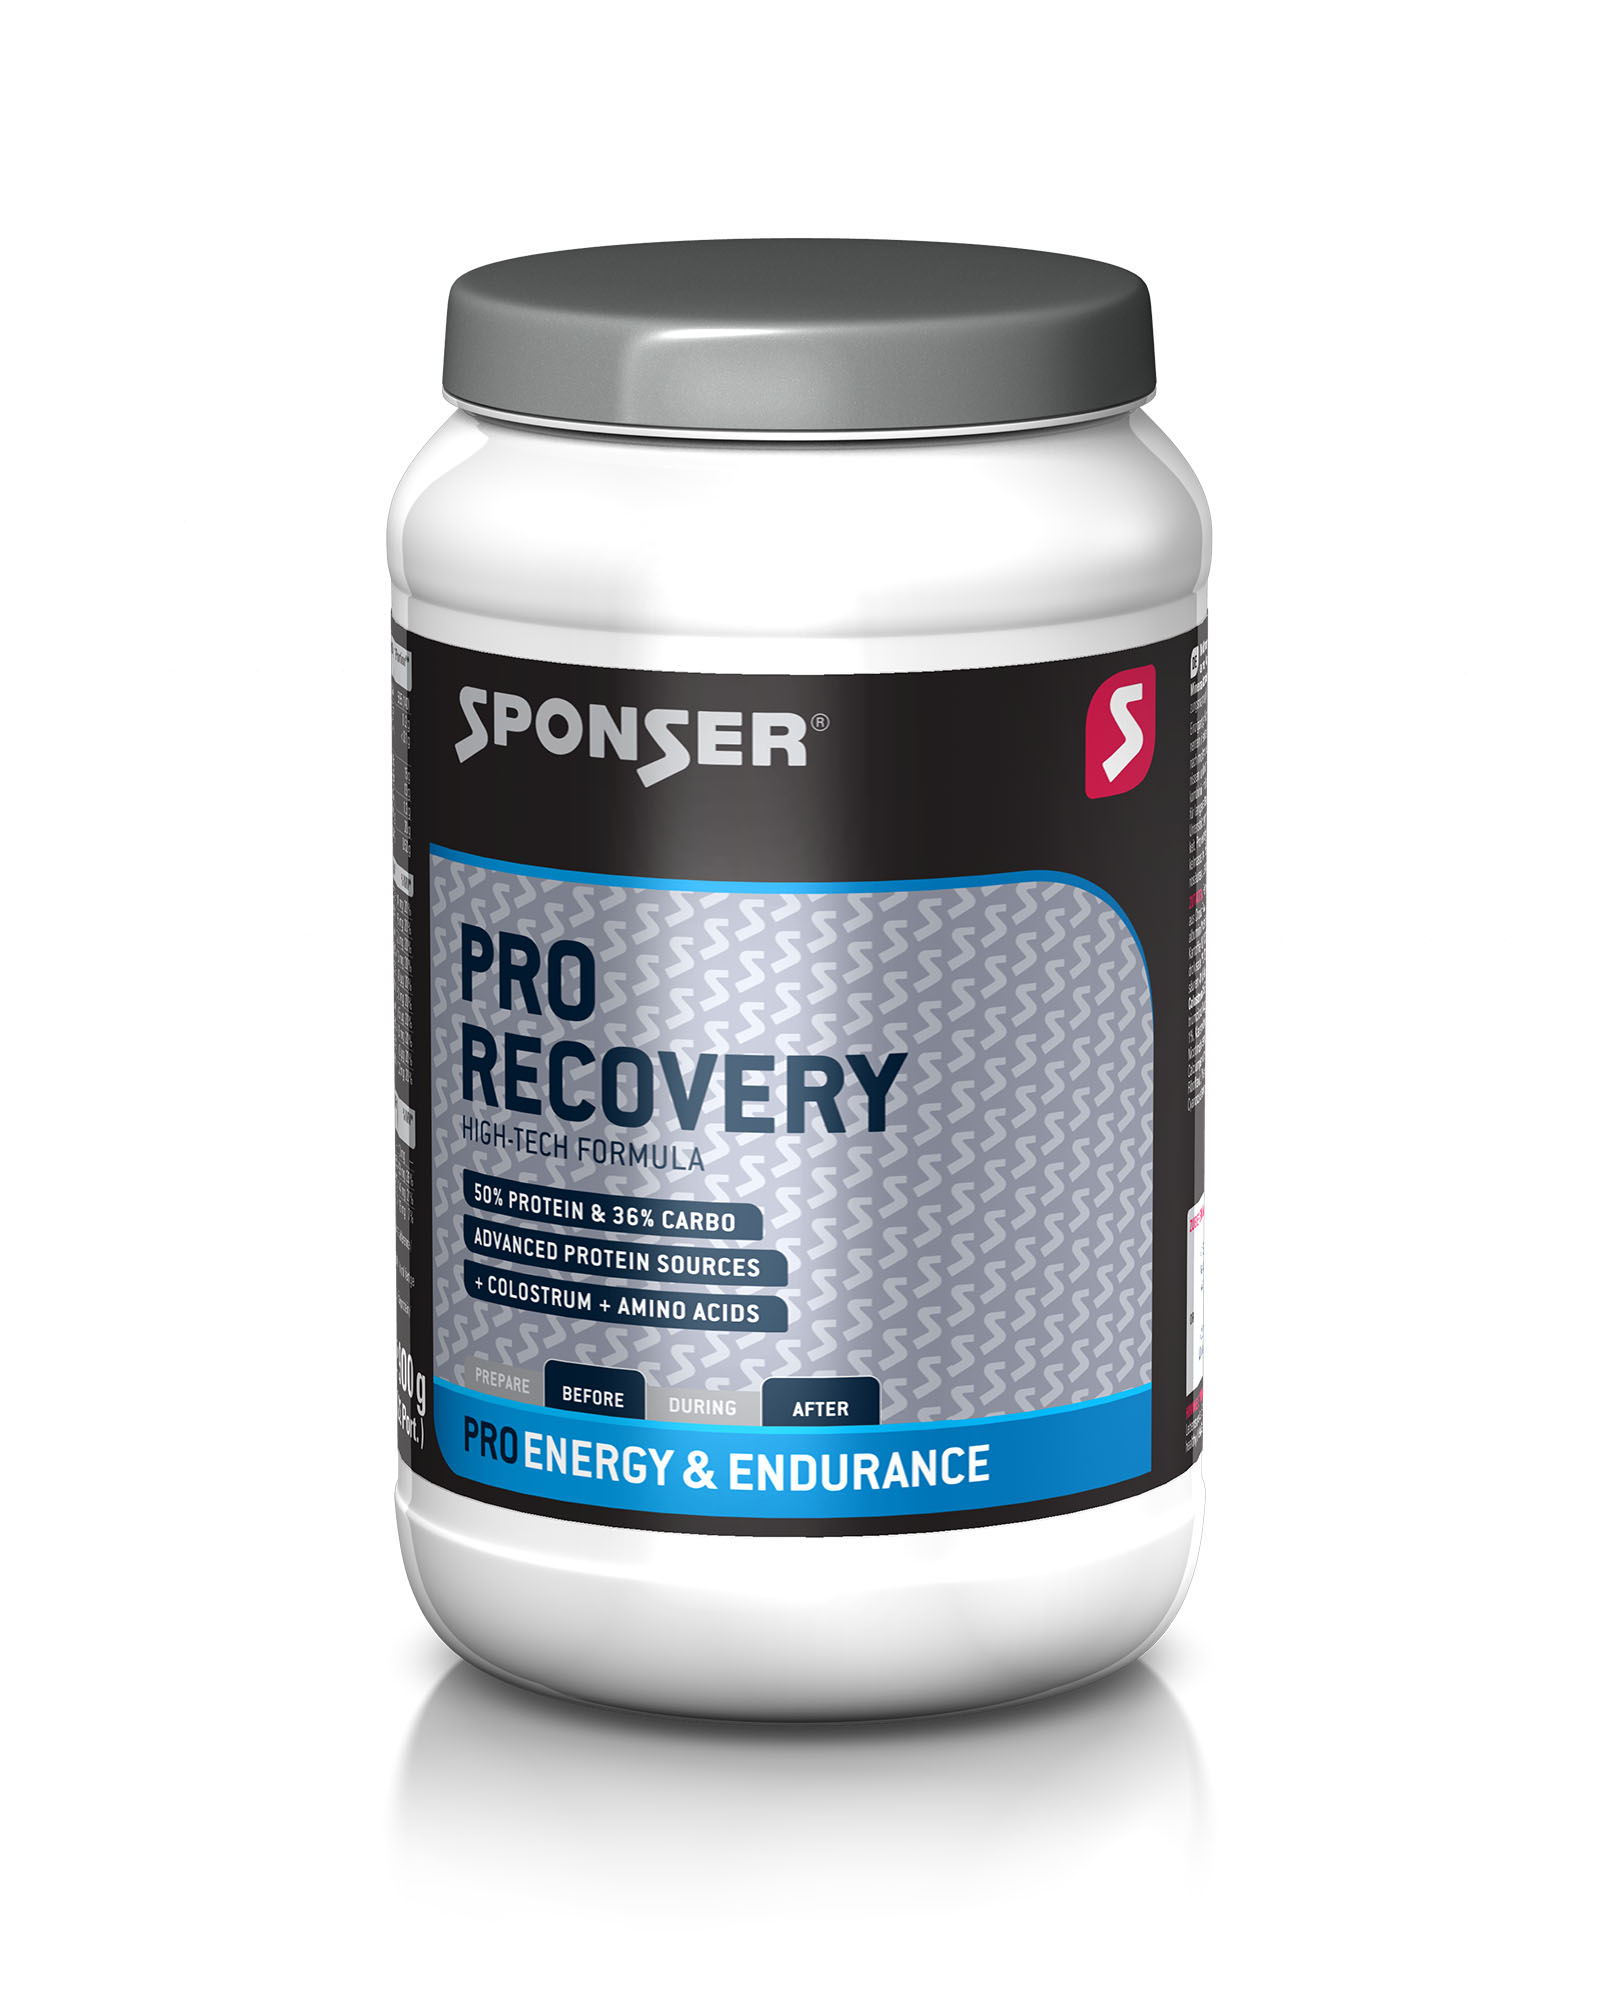 Sponser Pro Recovery 44/44 (800g Dose)